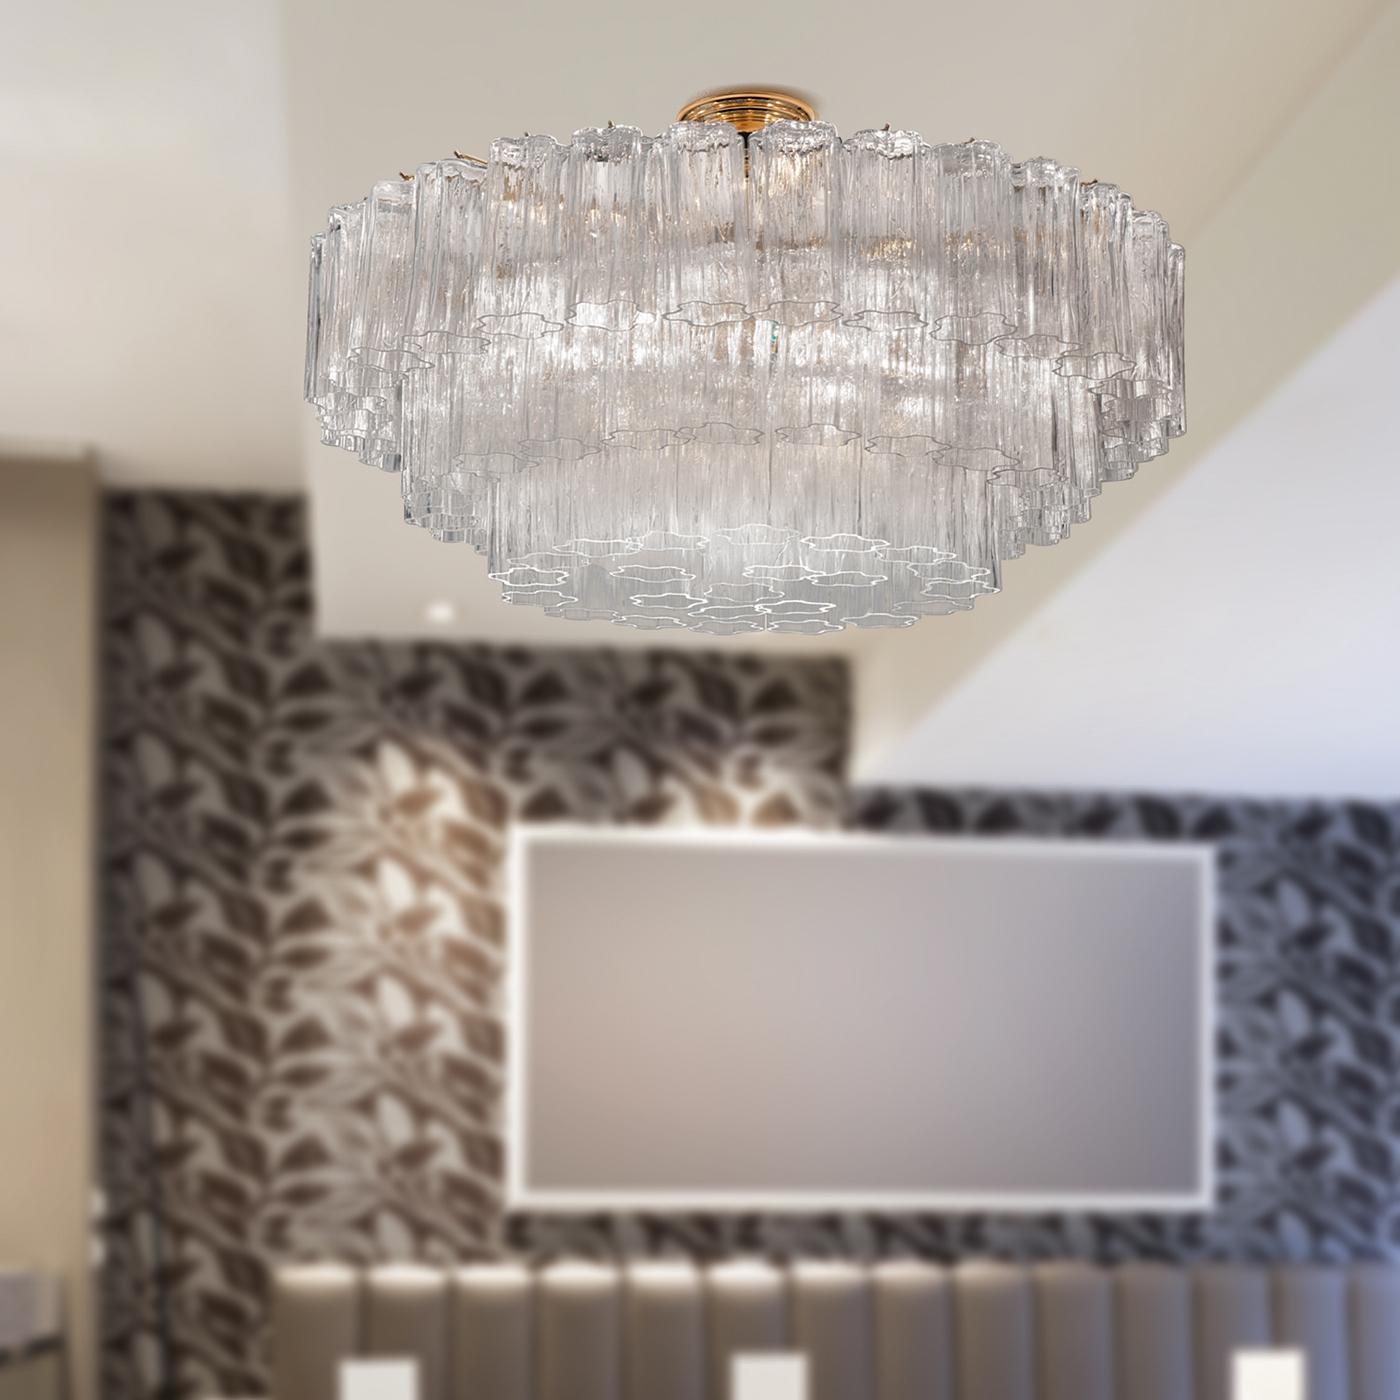 This incredible ceiling light offers a fantastic element of class and luxury to any modern style setting. Crafted in clear hammered glass with the main structure in a chrome or gold finish, this beautiful lighting fixture features an amazing and